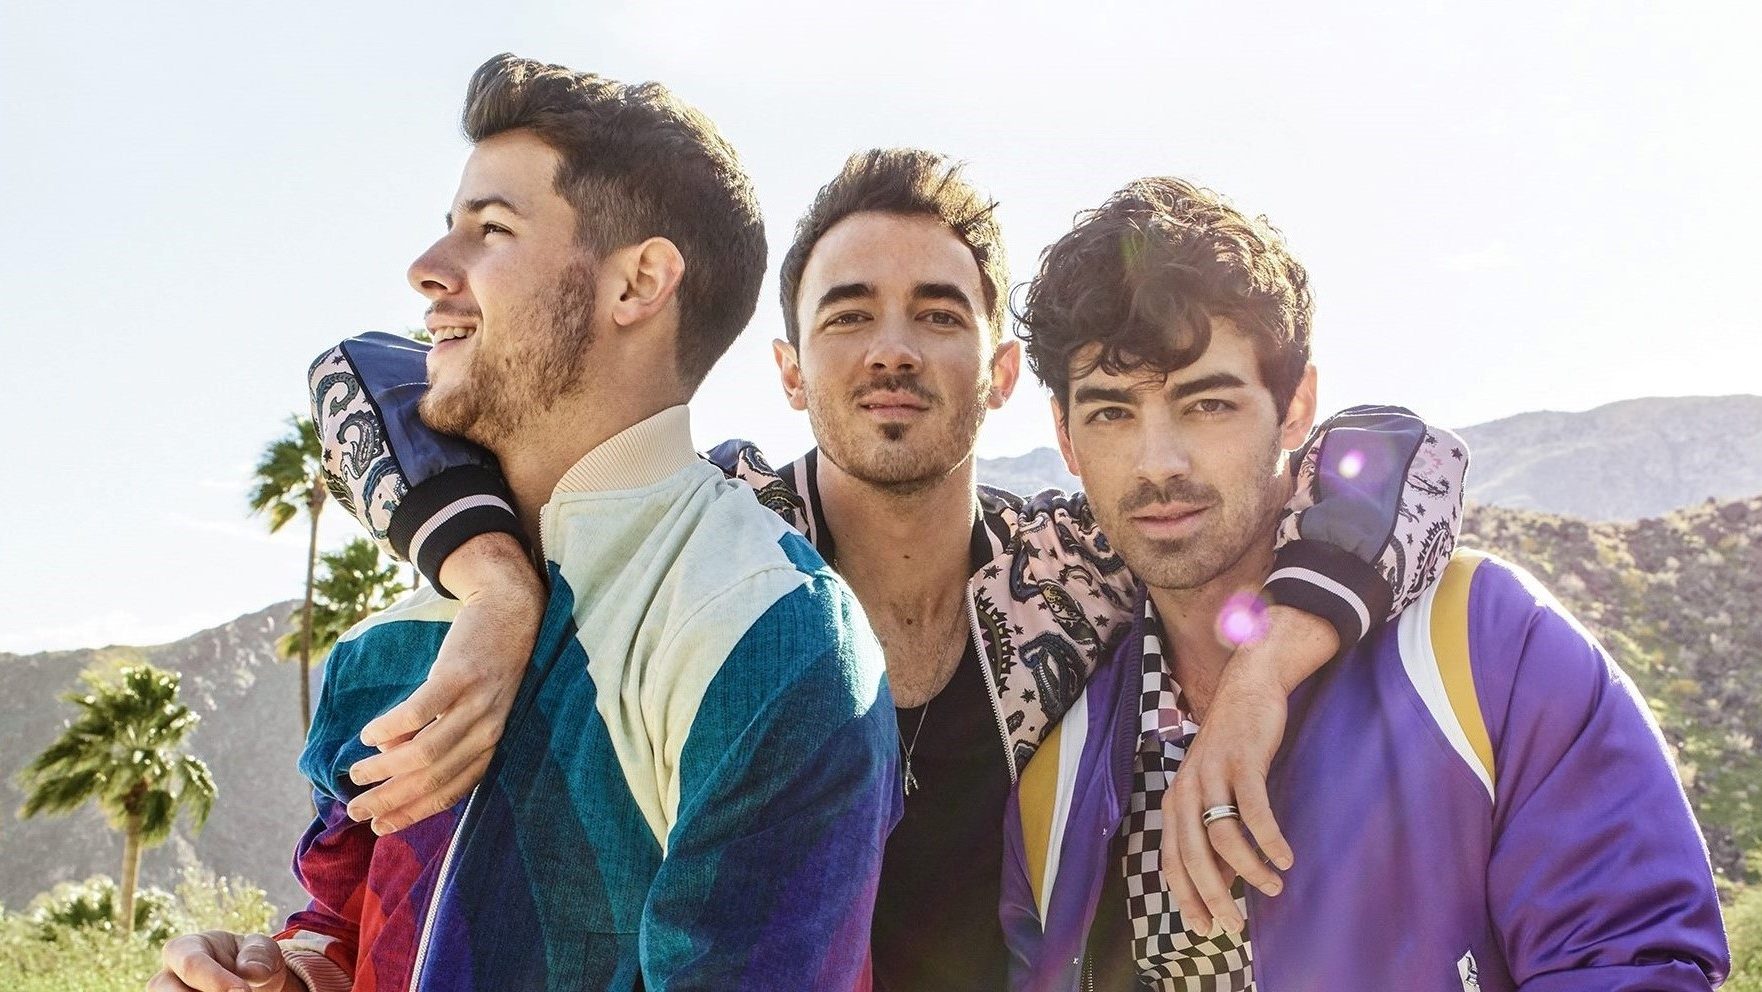 Jonas Brothers will receive a star on the Hollywood Walk of Fame